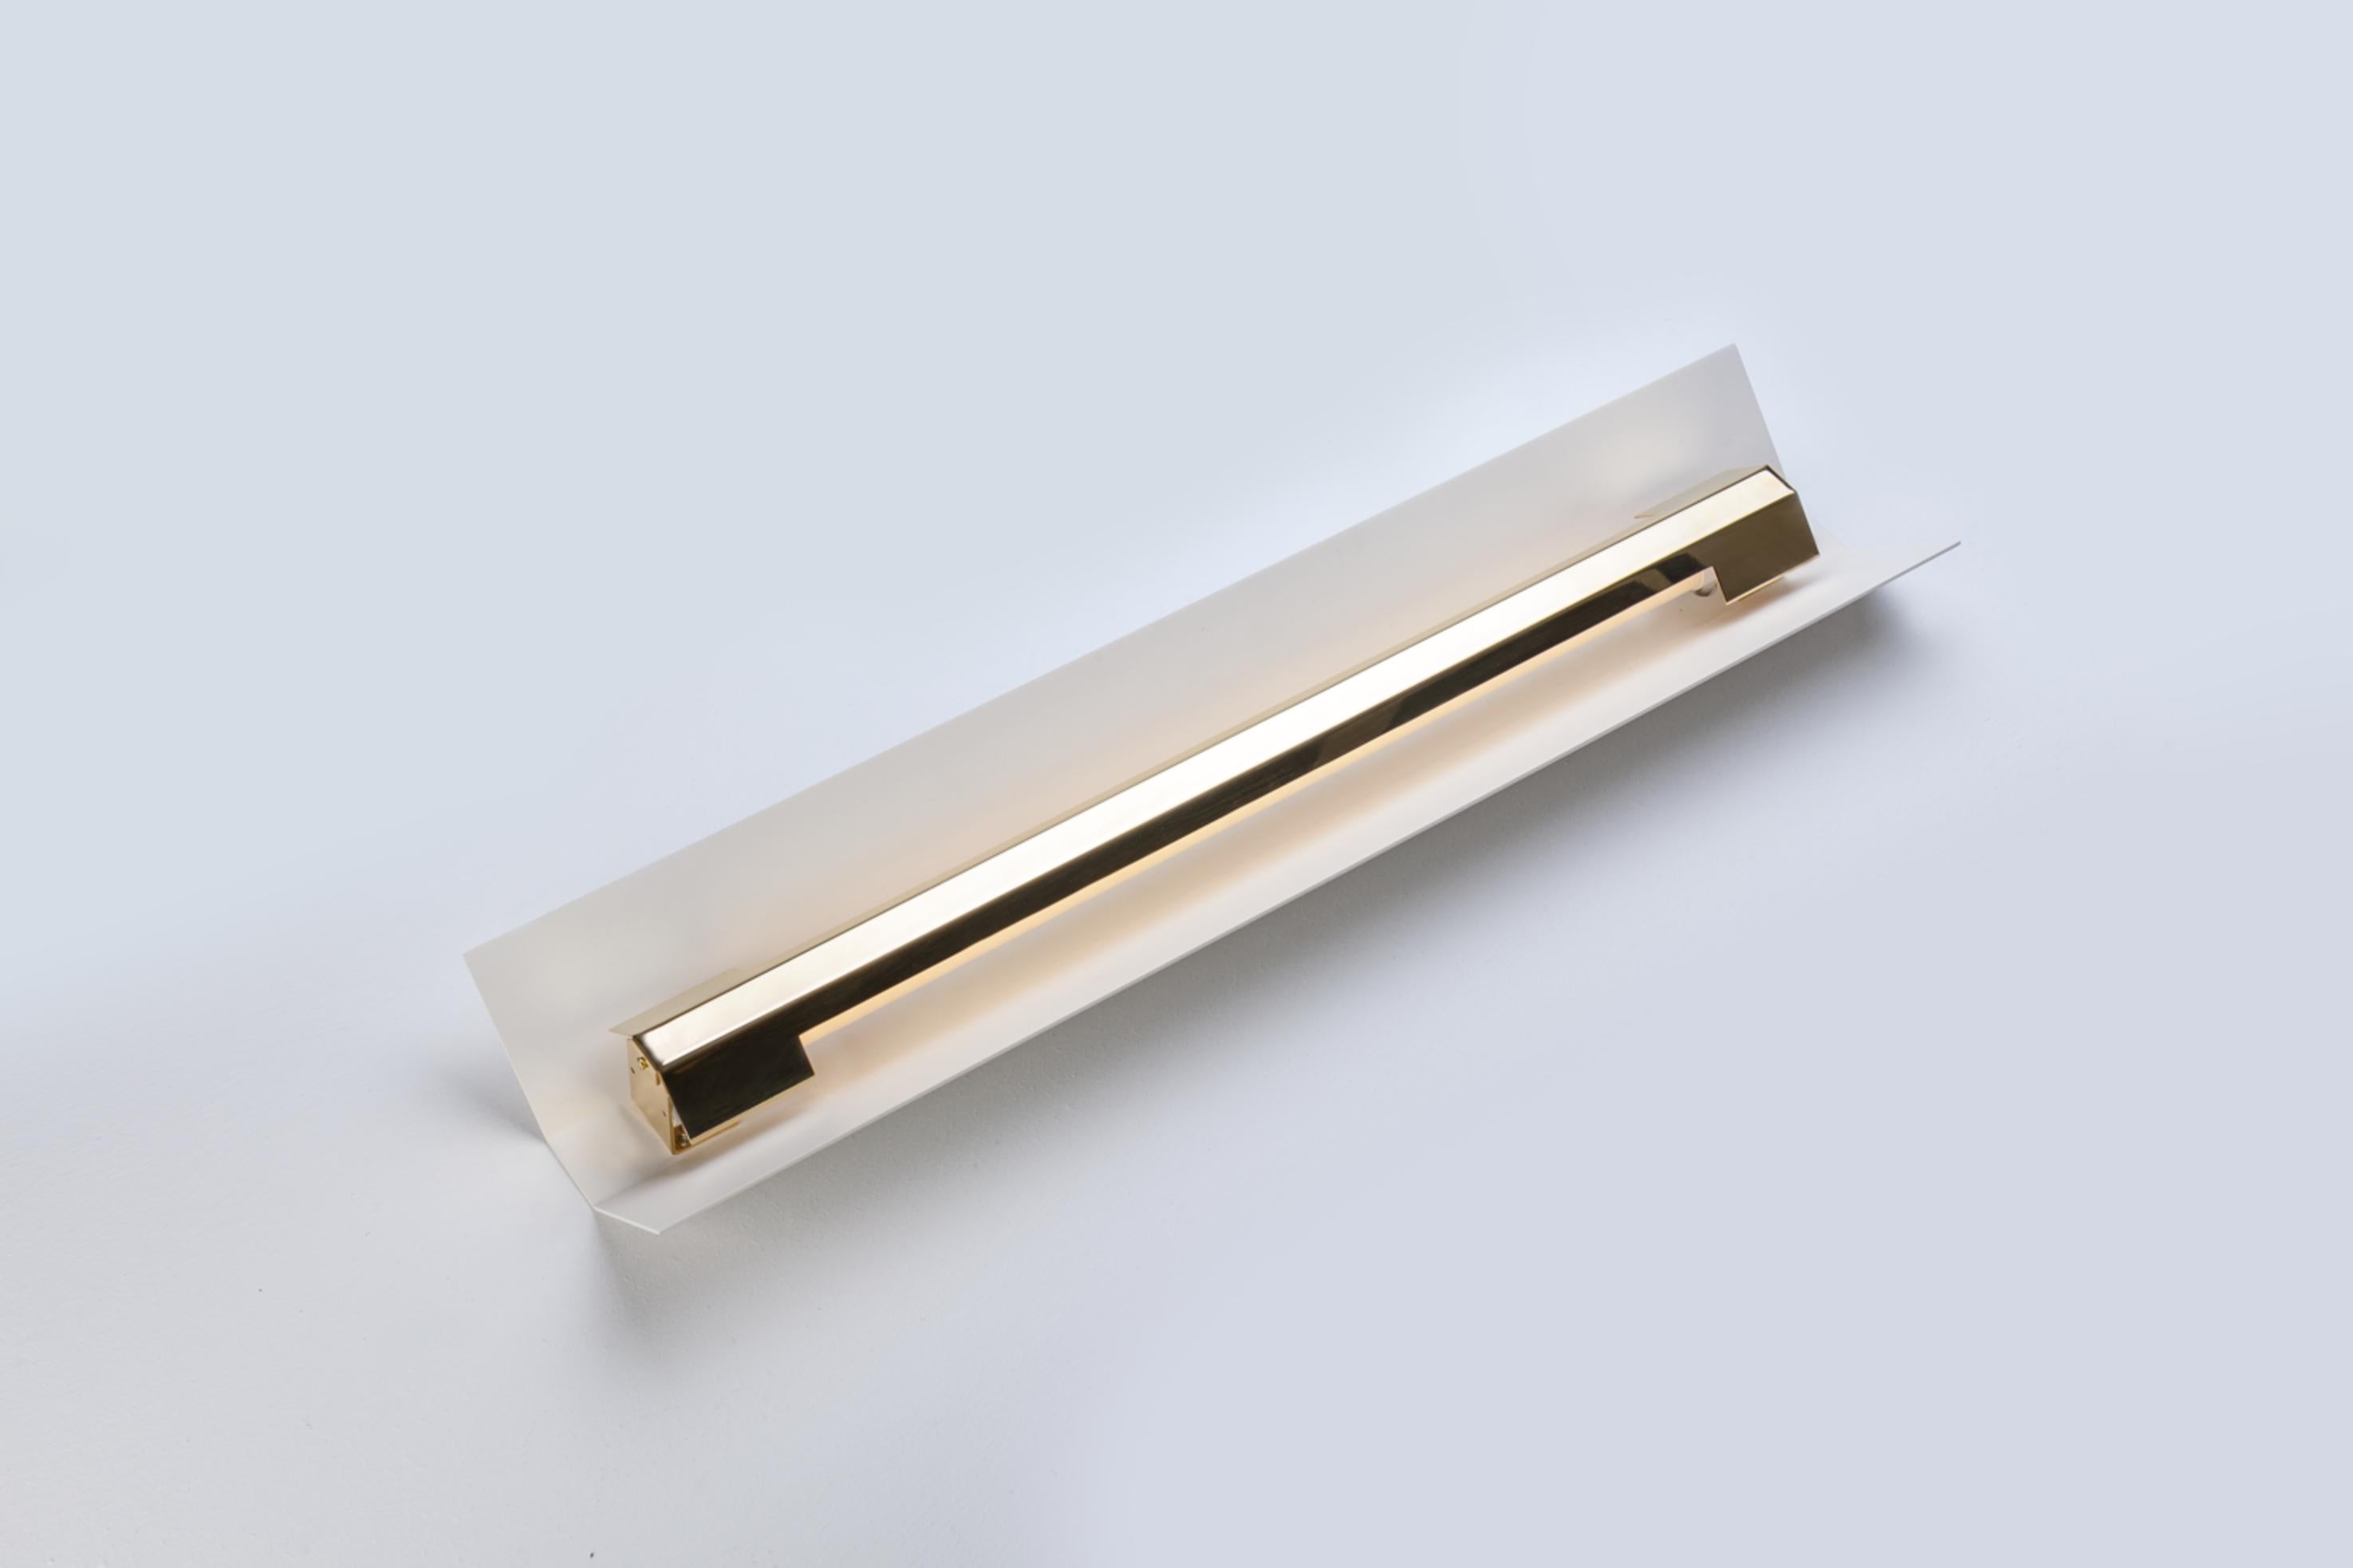 Extra Large Misalliance Ex pure white wall light by Lexavala
Dimensions: D 16 x W 160 x H 8 cm
Materials: powder coated shade with details made of brass or stainless steel.

There are two lenghts of socket covers, extending over the LED. Two